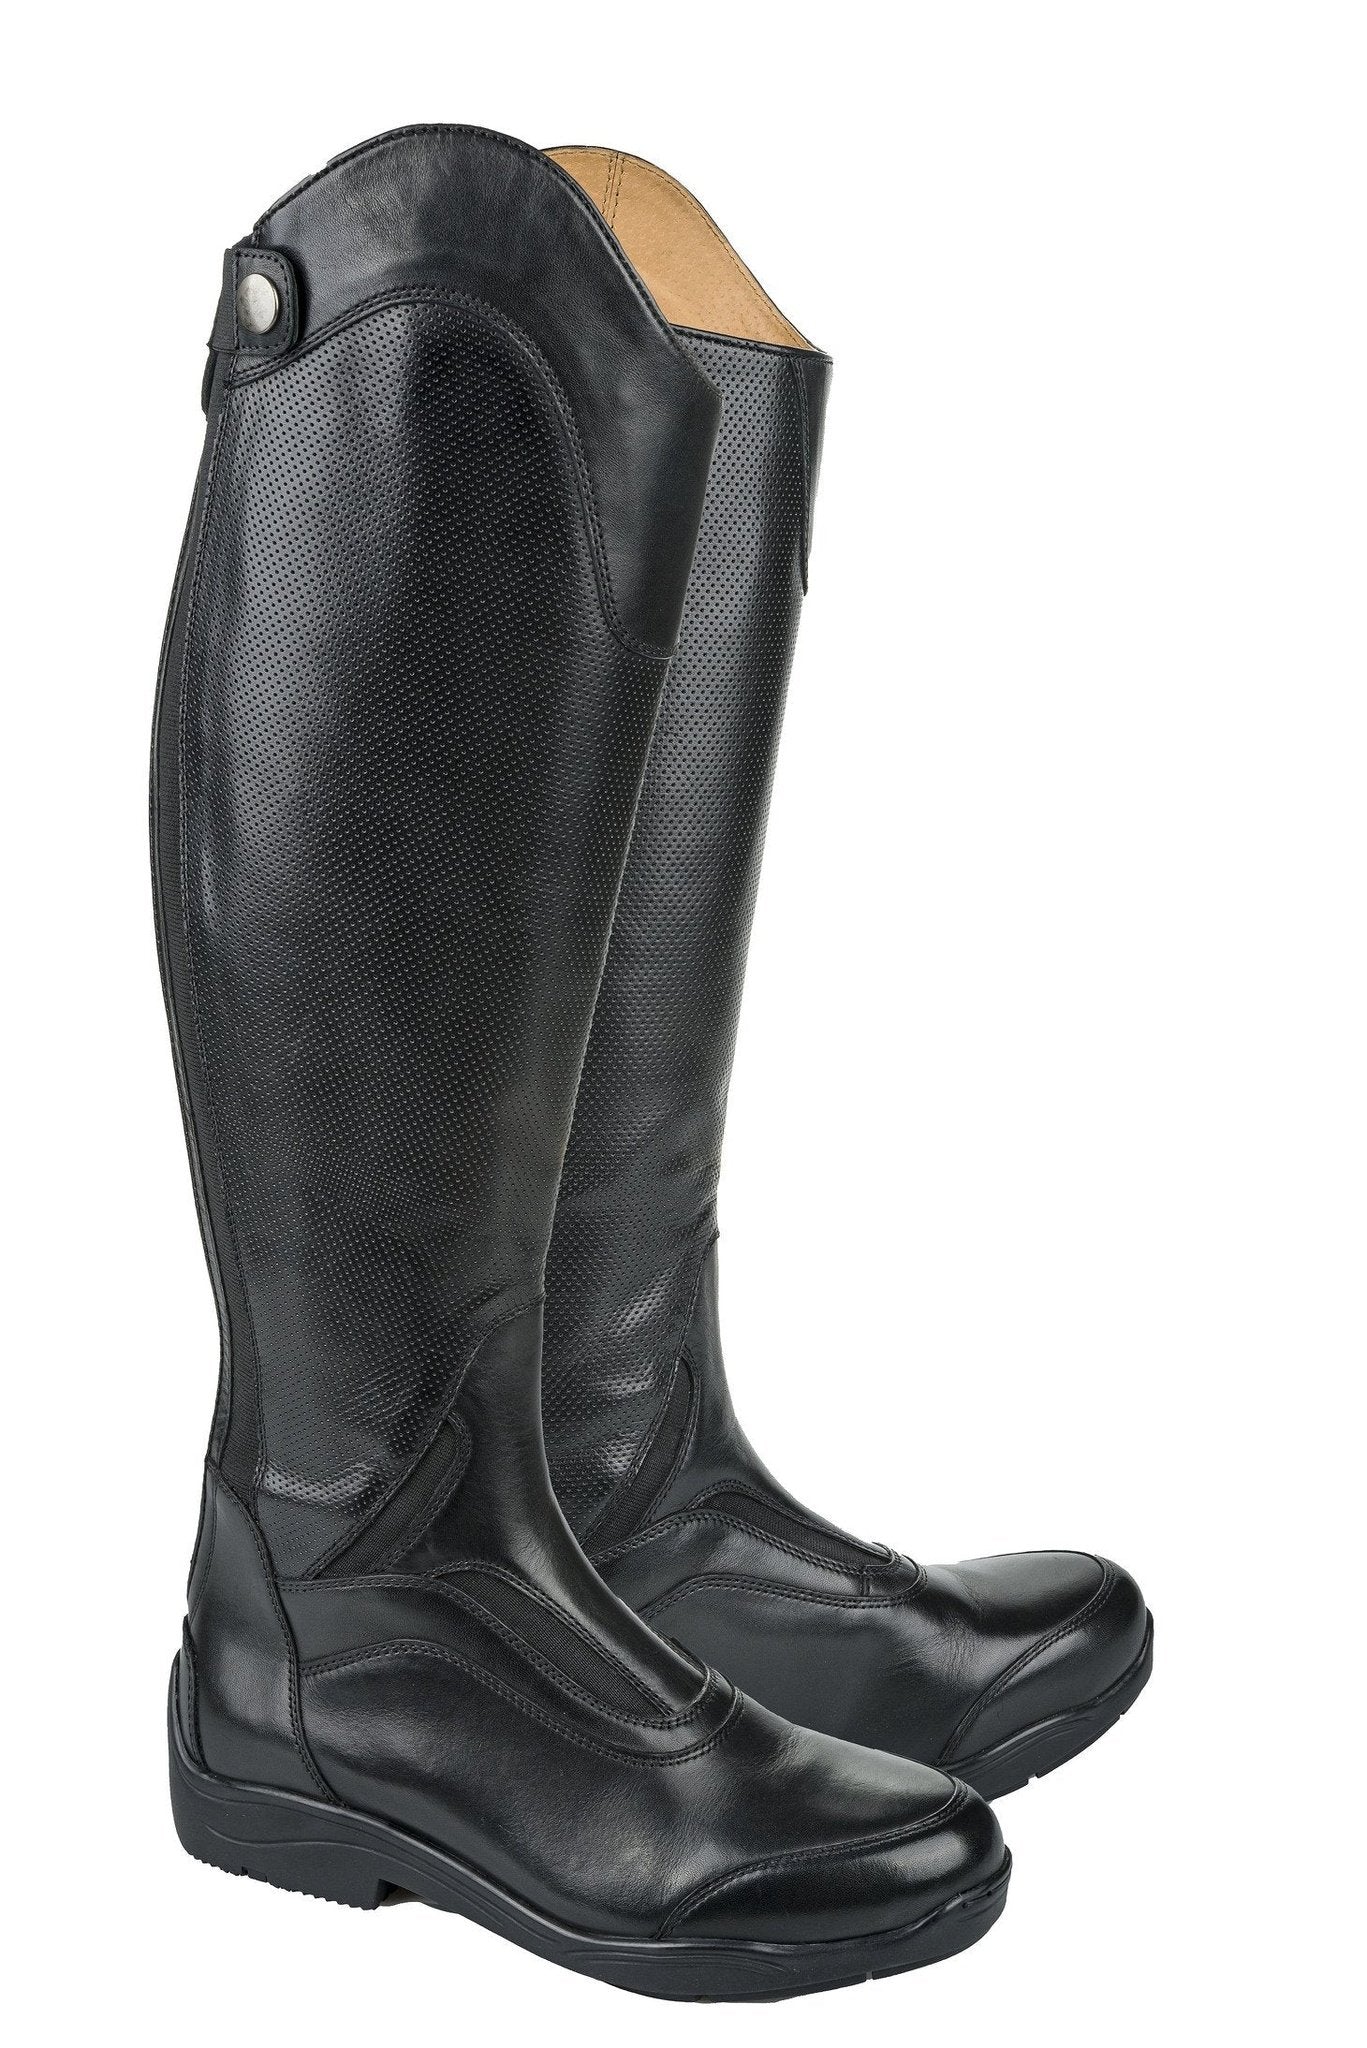 Tuffrider Ladies Double Clear Sport Boot - Breeches.com